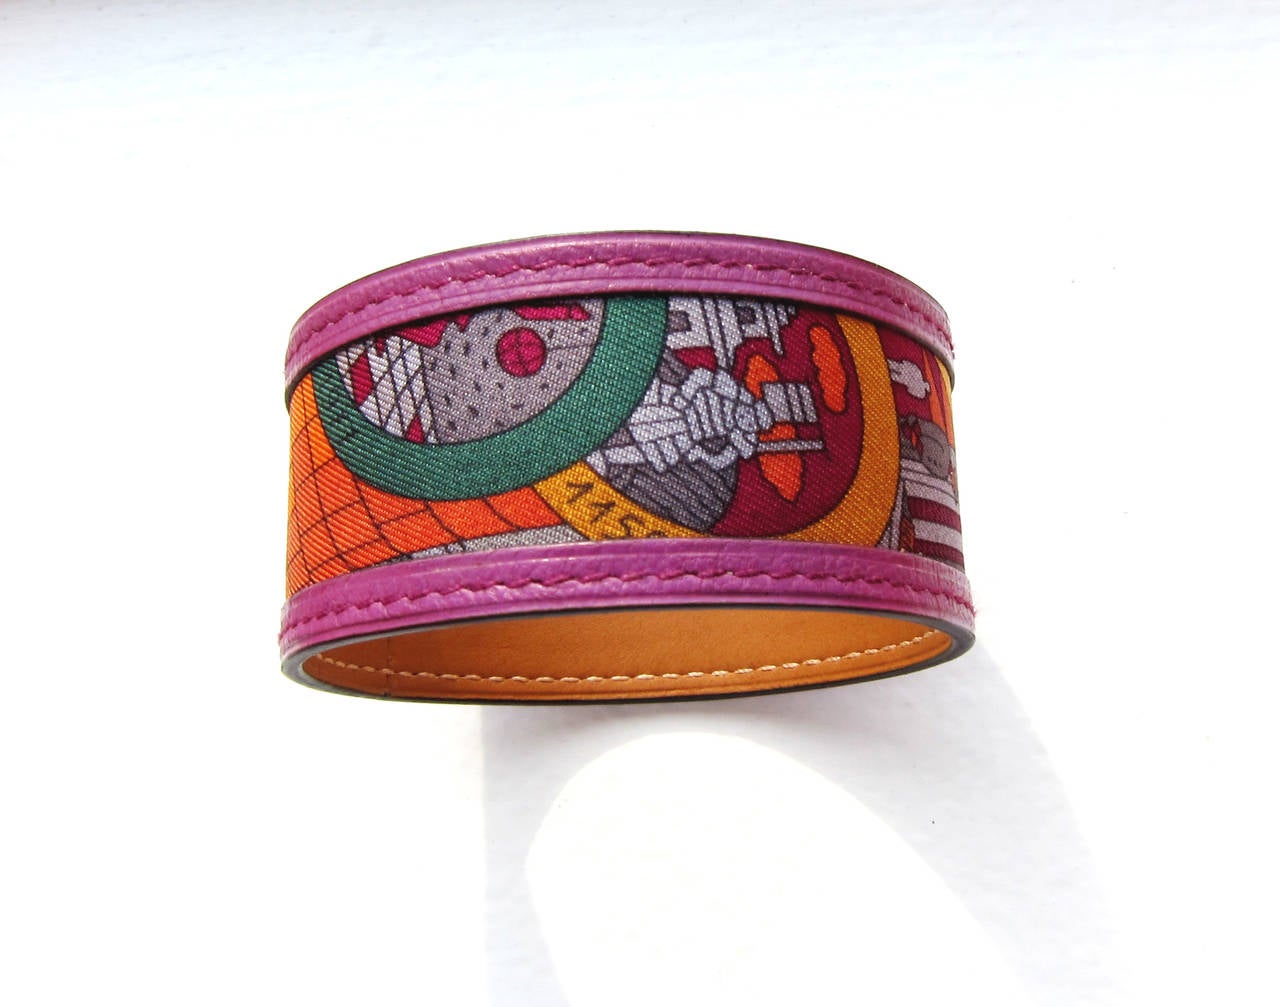 Hermes Petit H Silk Leather Bracelet One of a Kind

World Exclusive from the Hermes Petit H Collection
Brand New in Box 
Coming store fresh with Hermes pouch, box and ribbon
Silk and Leather Bracelet Petit H Bracelet
Standard size 65mm inside